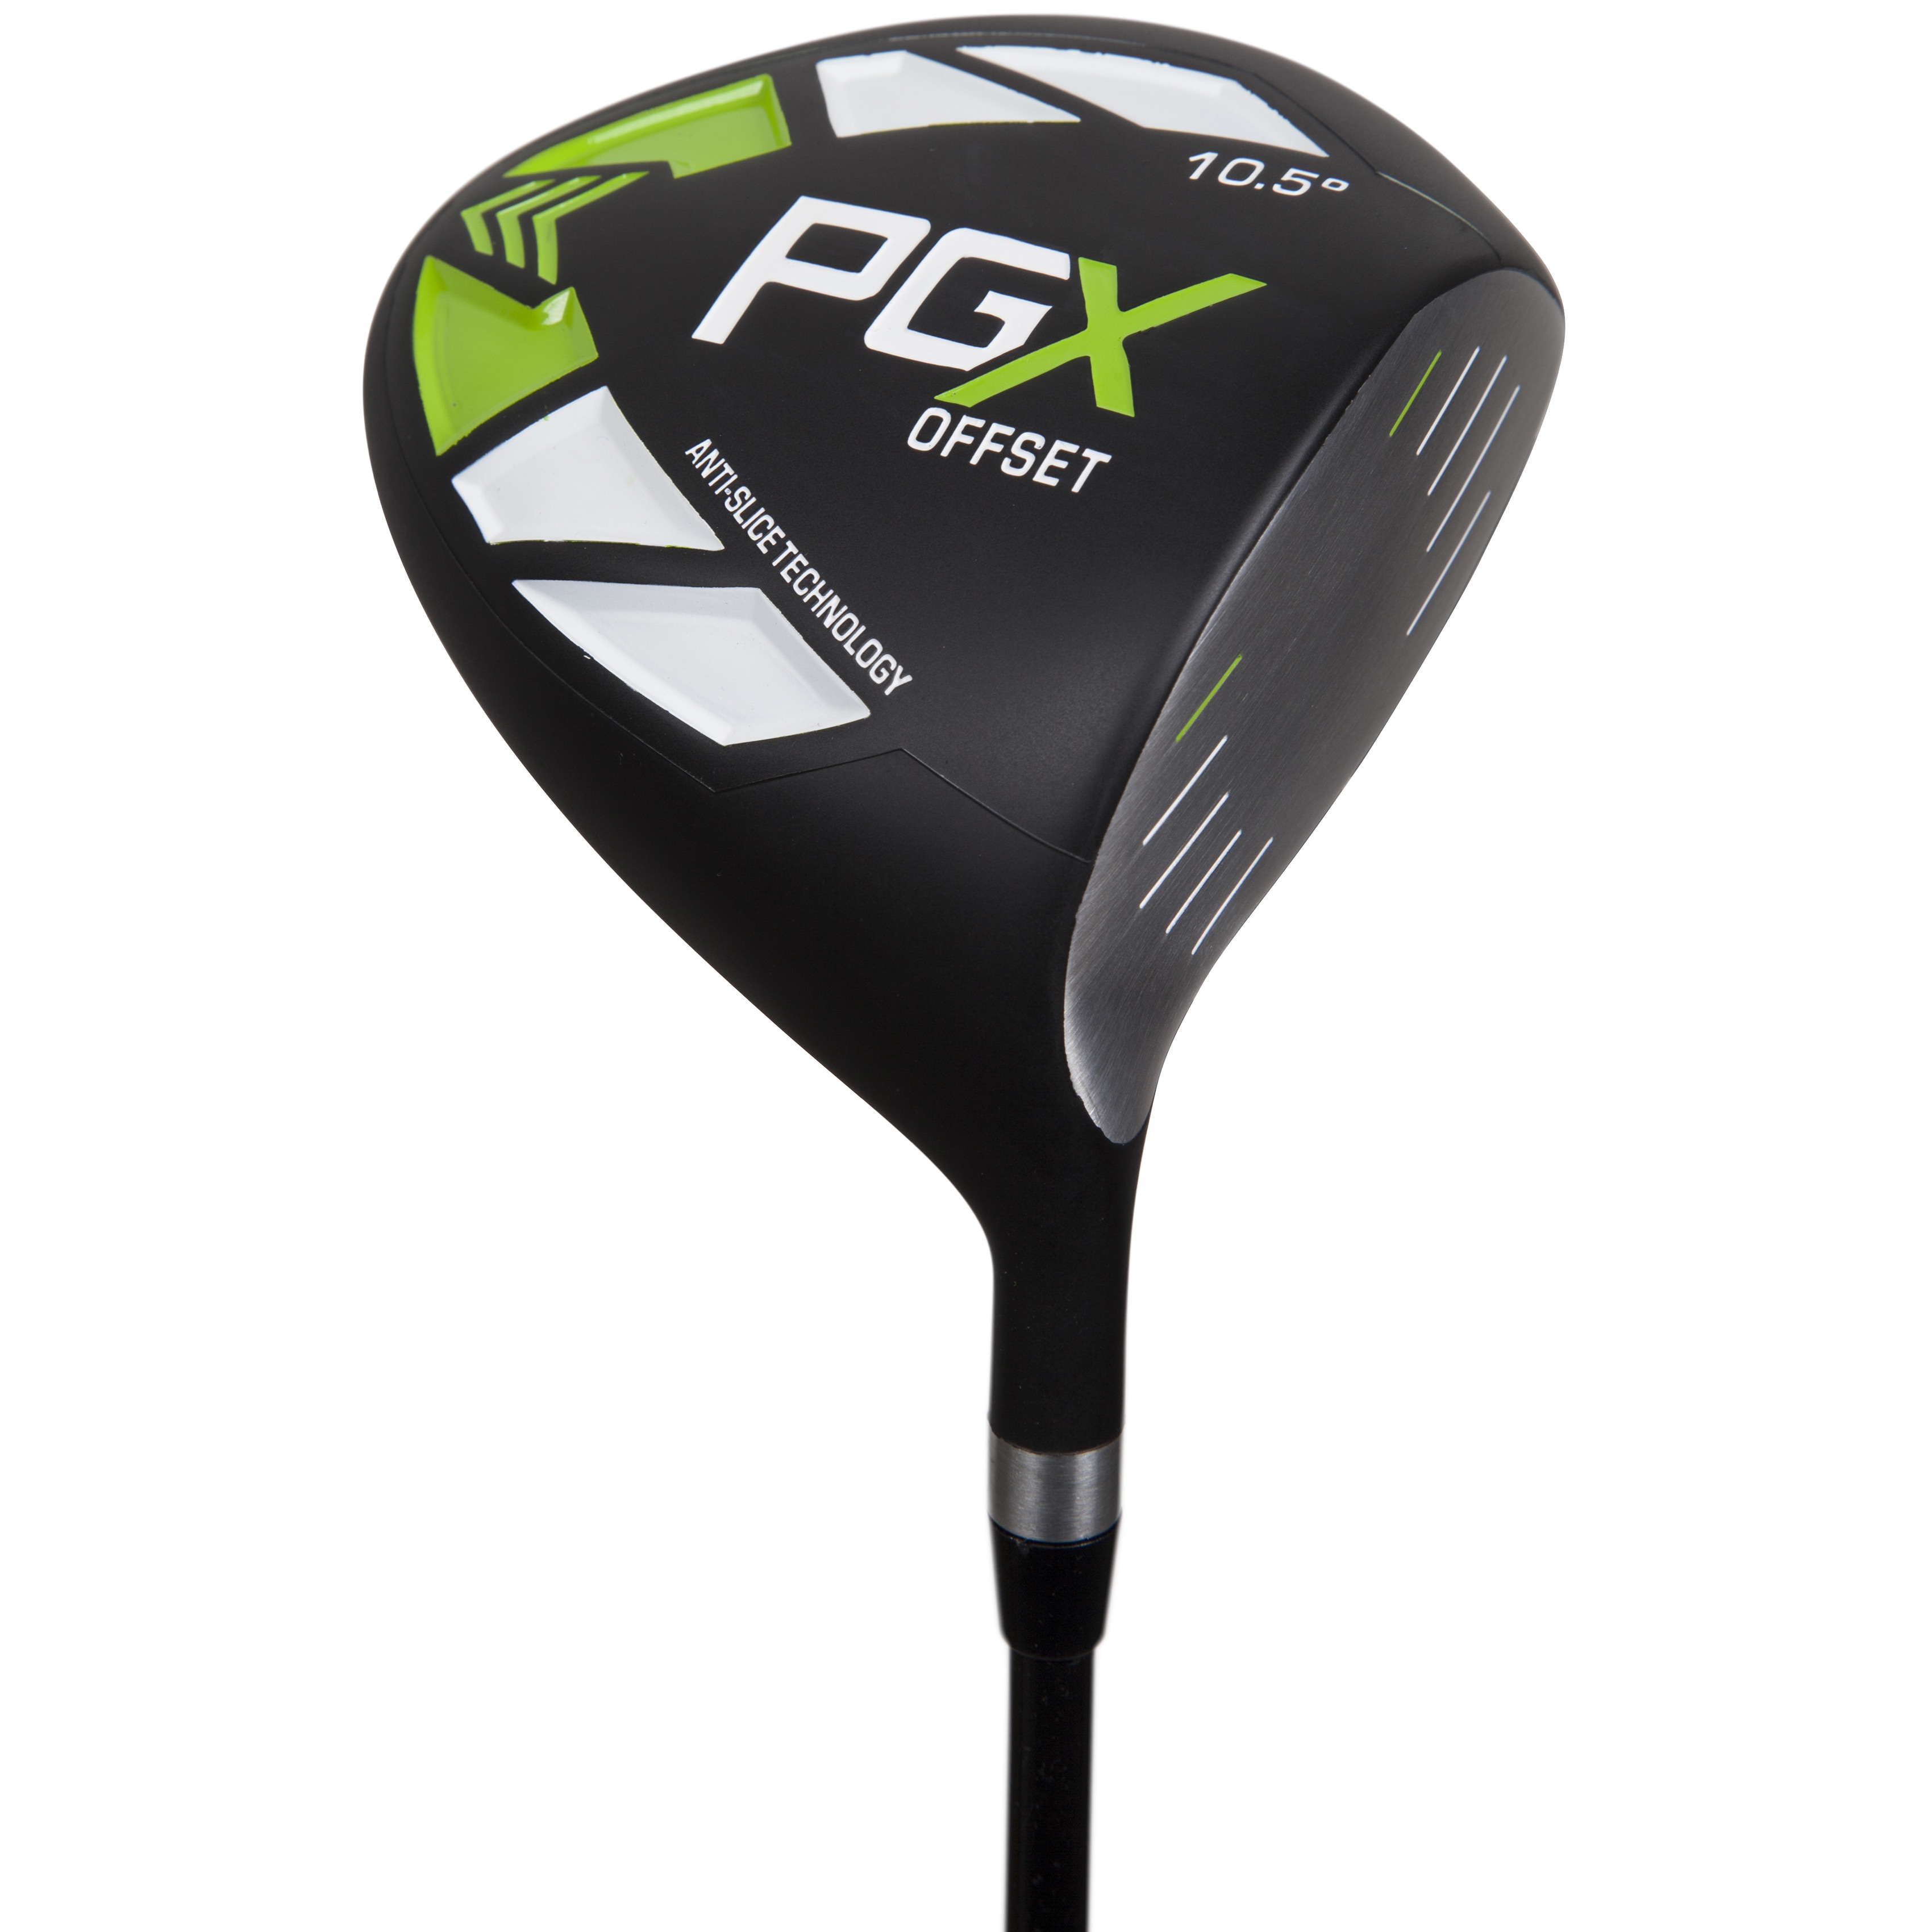 Pinemeadow Golf PGX Offset Driver - image 1 of 5